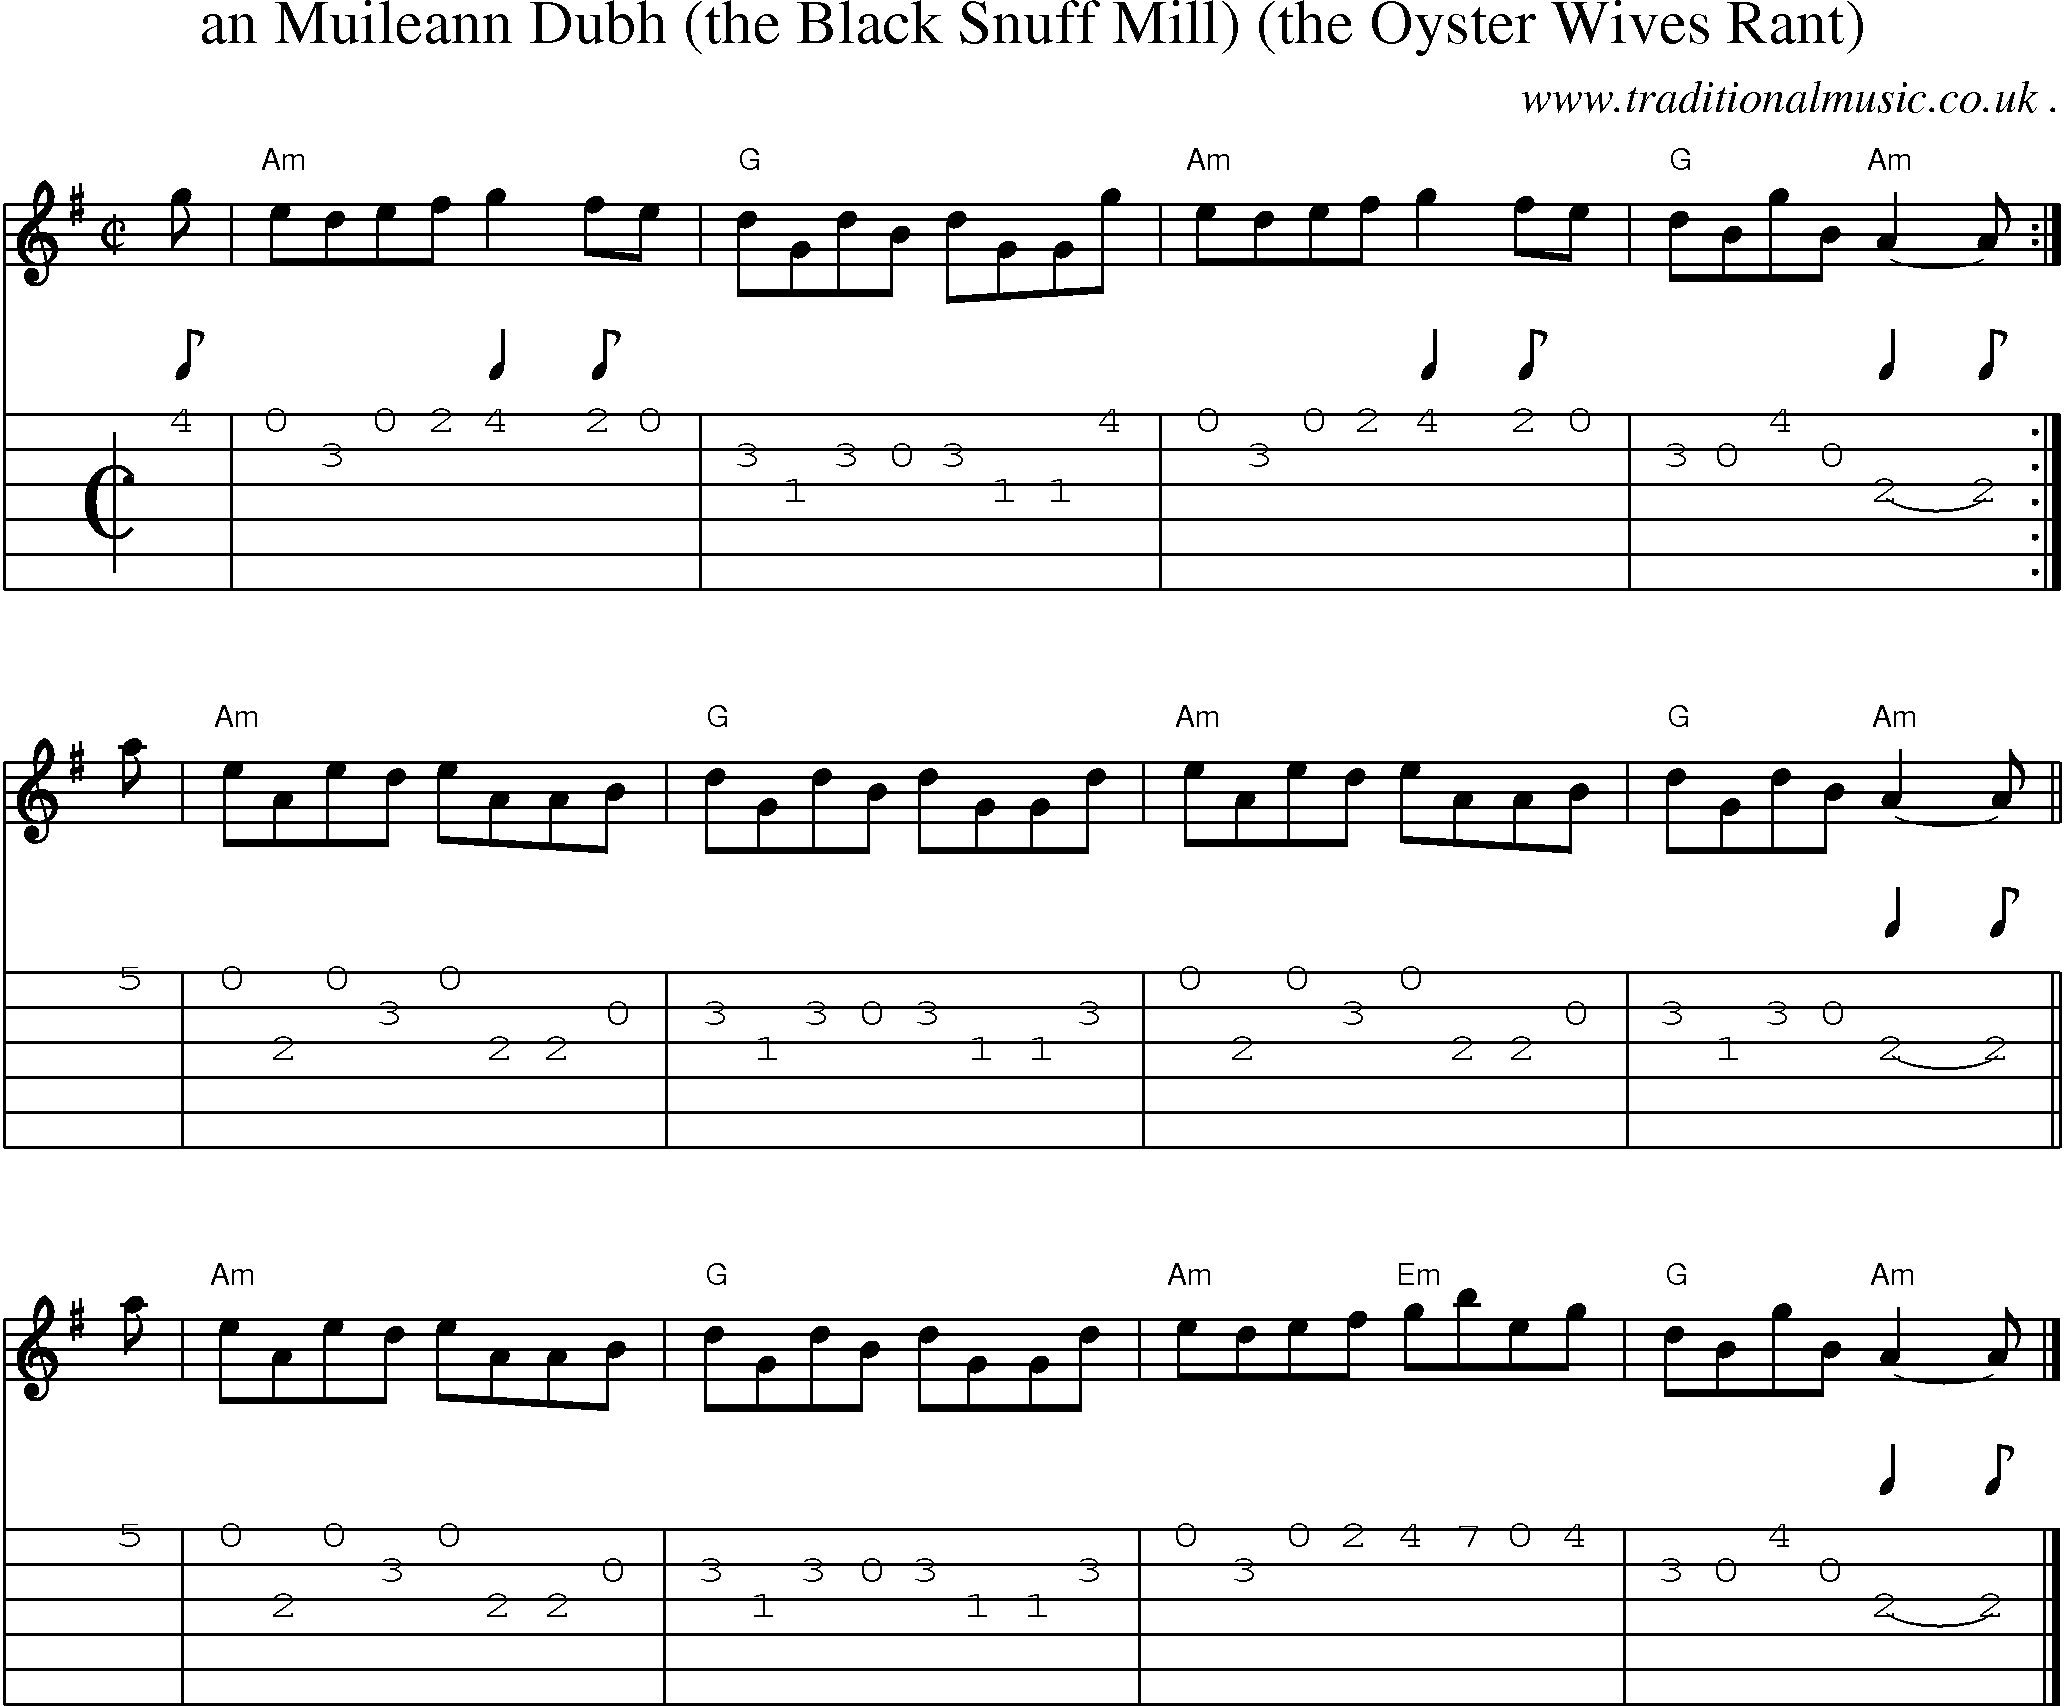 Sheet-music  score, Chords and Guitar Tabs for An Muileann Dubh The Black Snuff Mill The Oyster Wives Rant